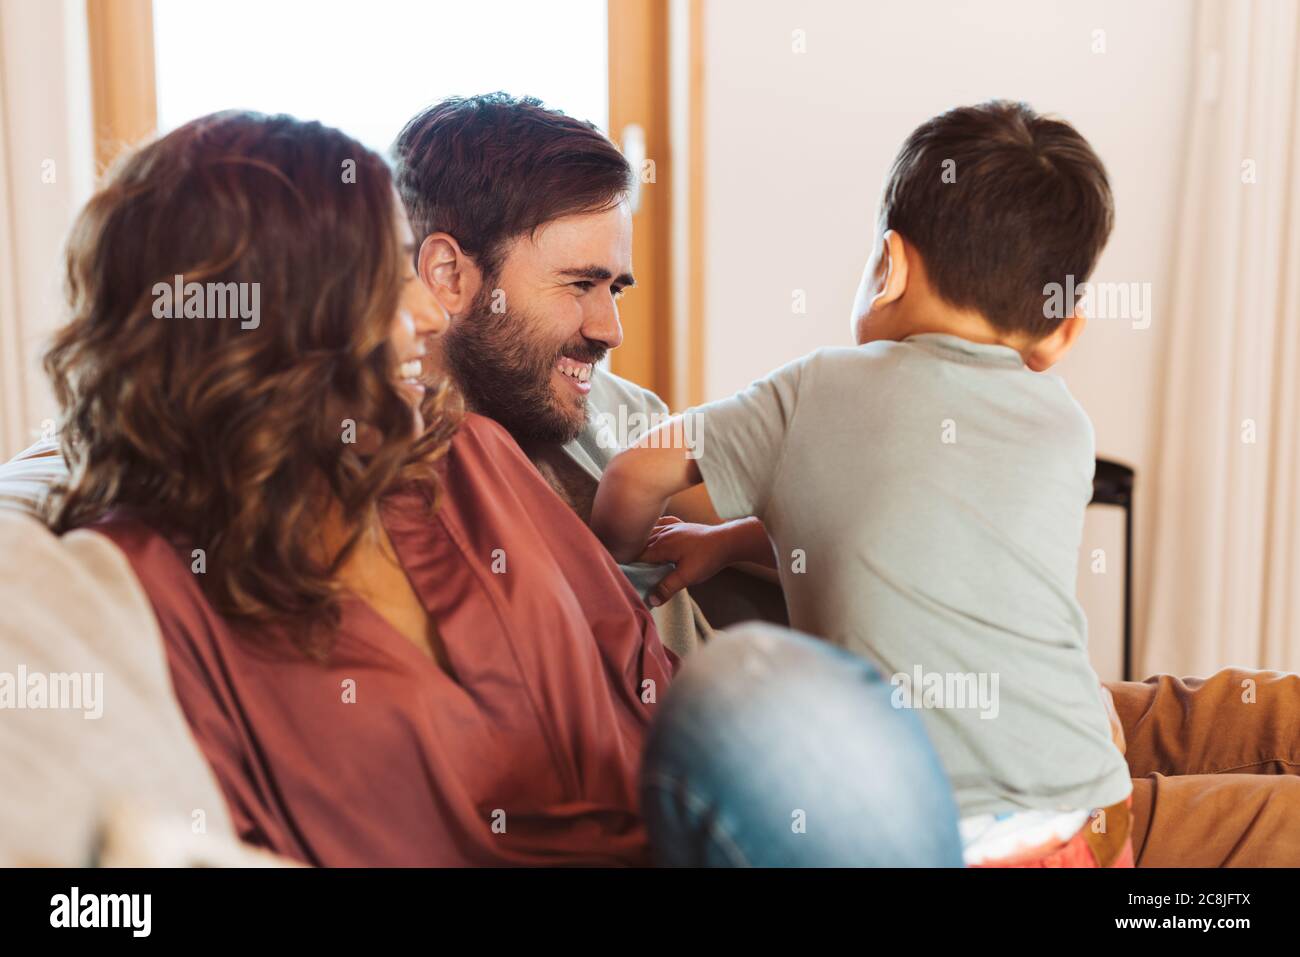 Young family having fun at home Stock Photo